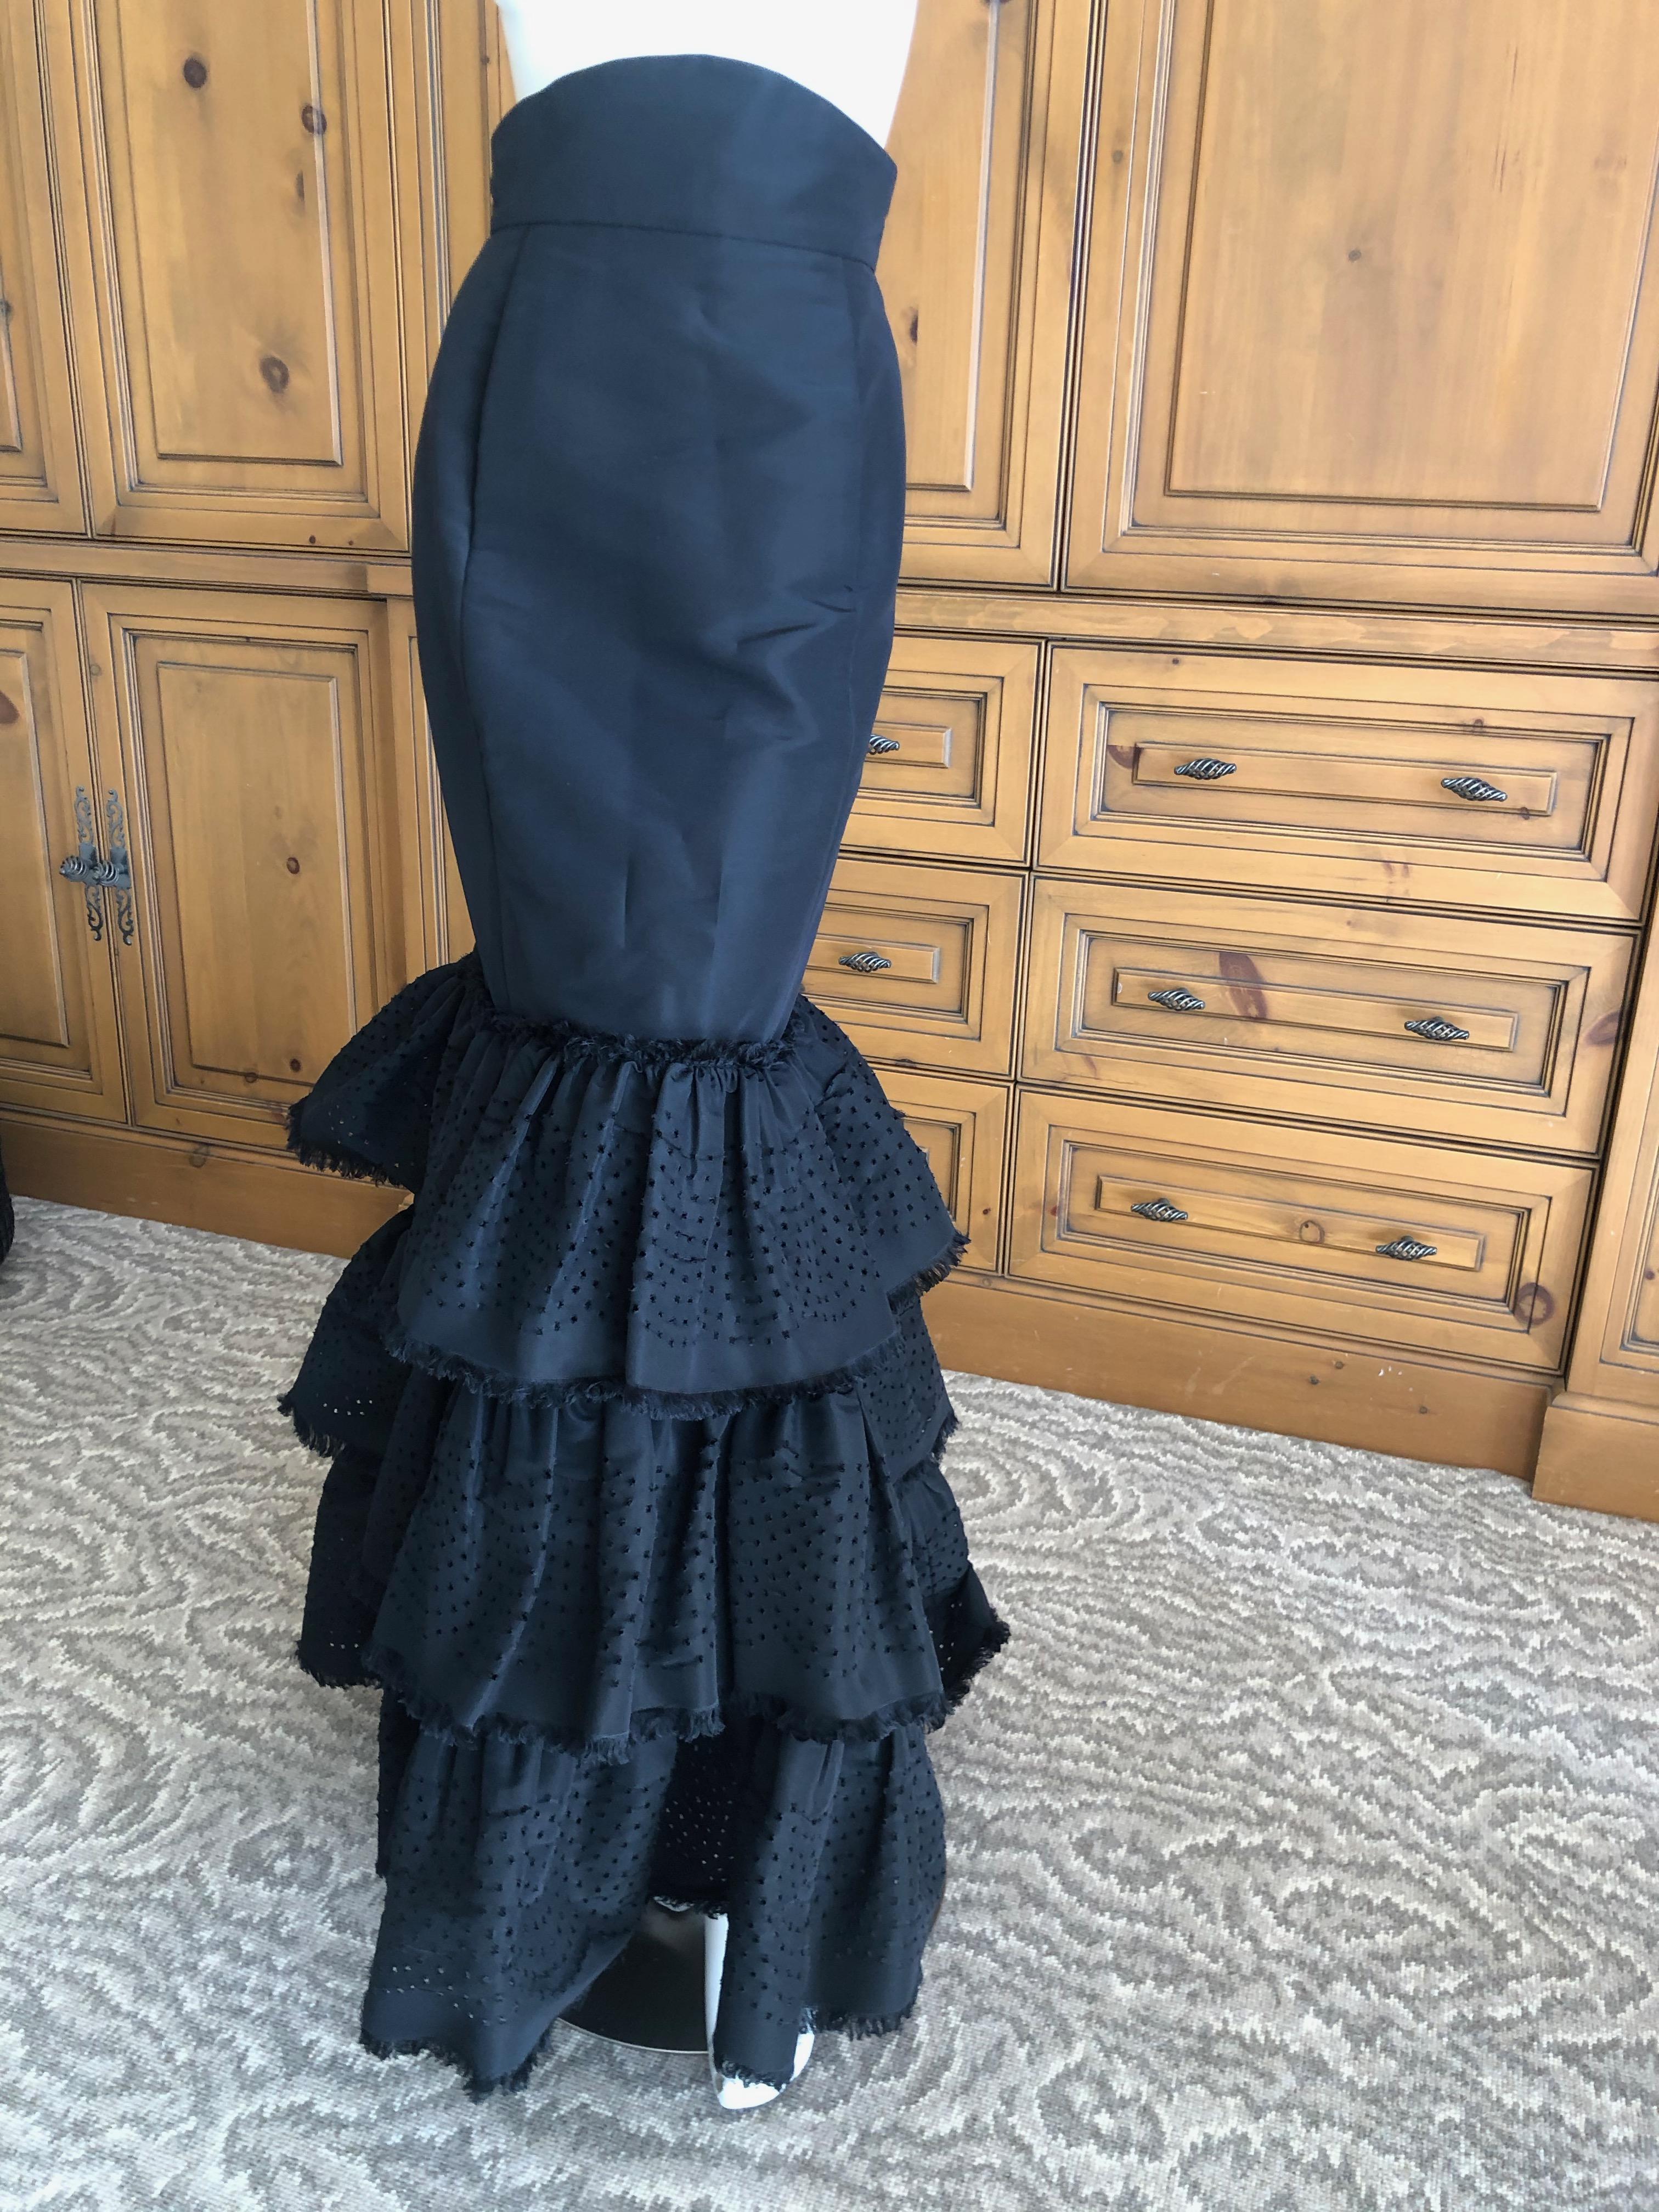 Oscar de la Renta Romantic Vintage Black Eyelet Mermaid Ball Skirt 
Simply Stunning. 
Size 4
Please use the zoom feature to see all the remarkable details.
 Waist 26